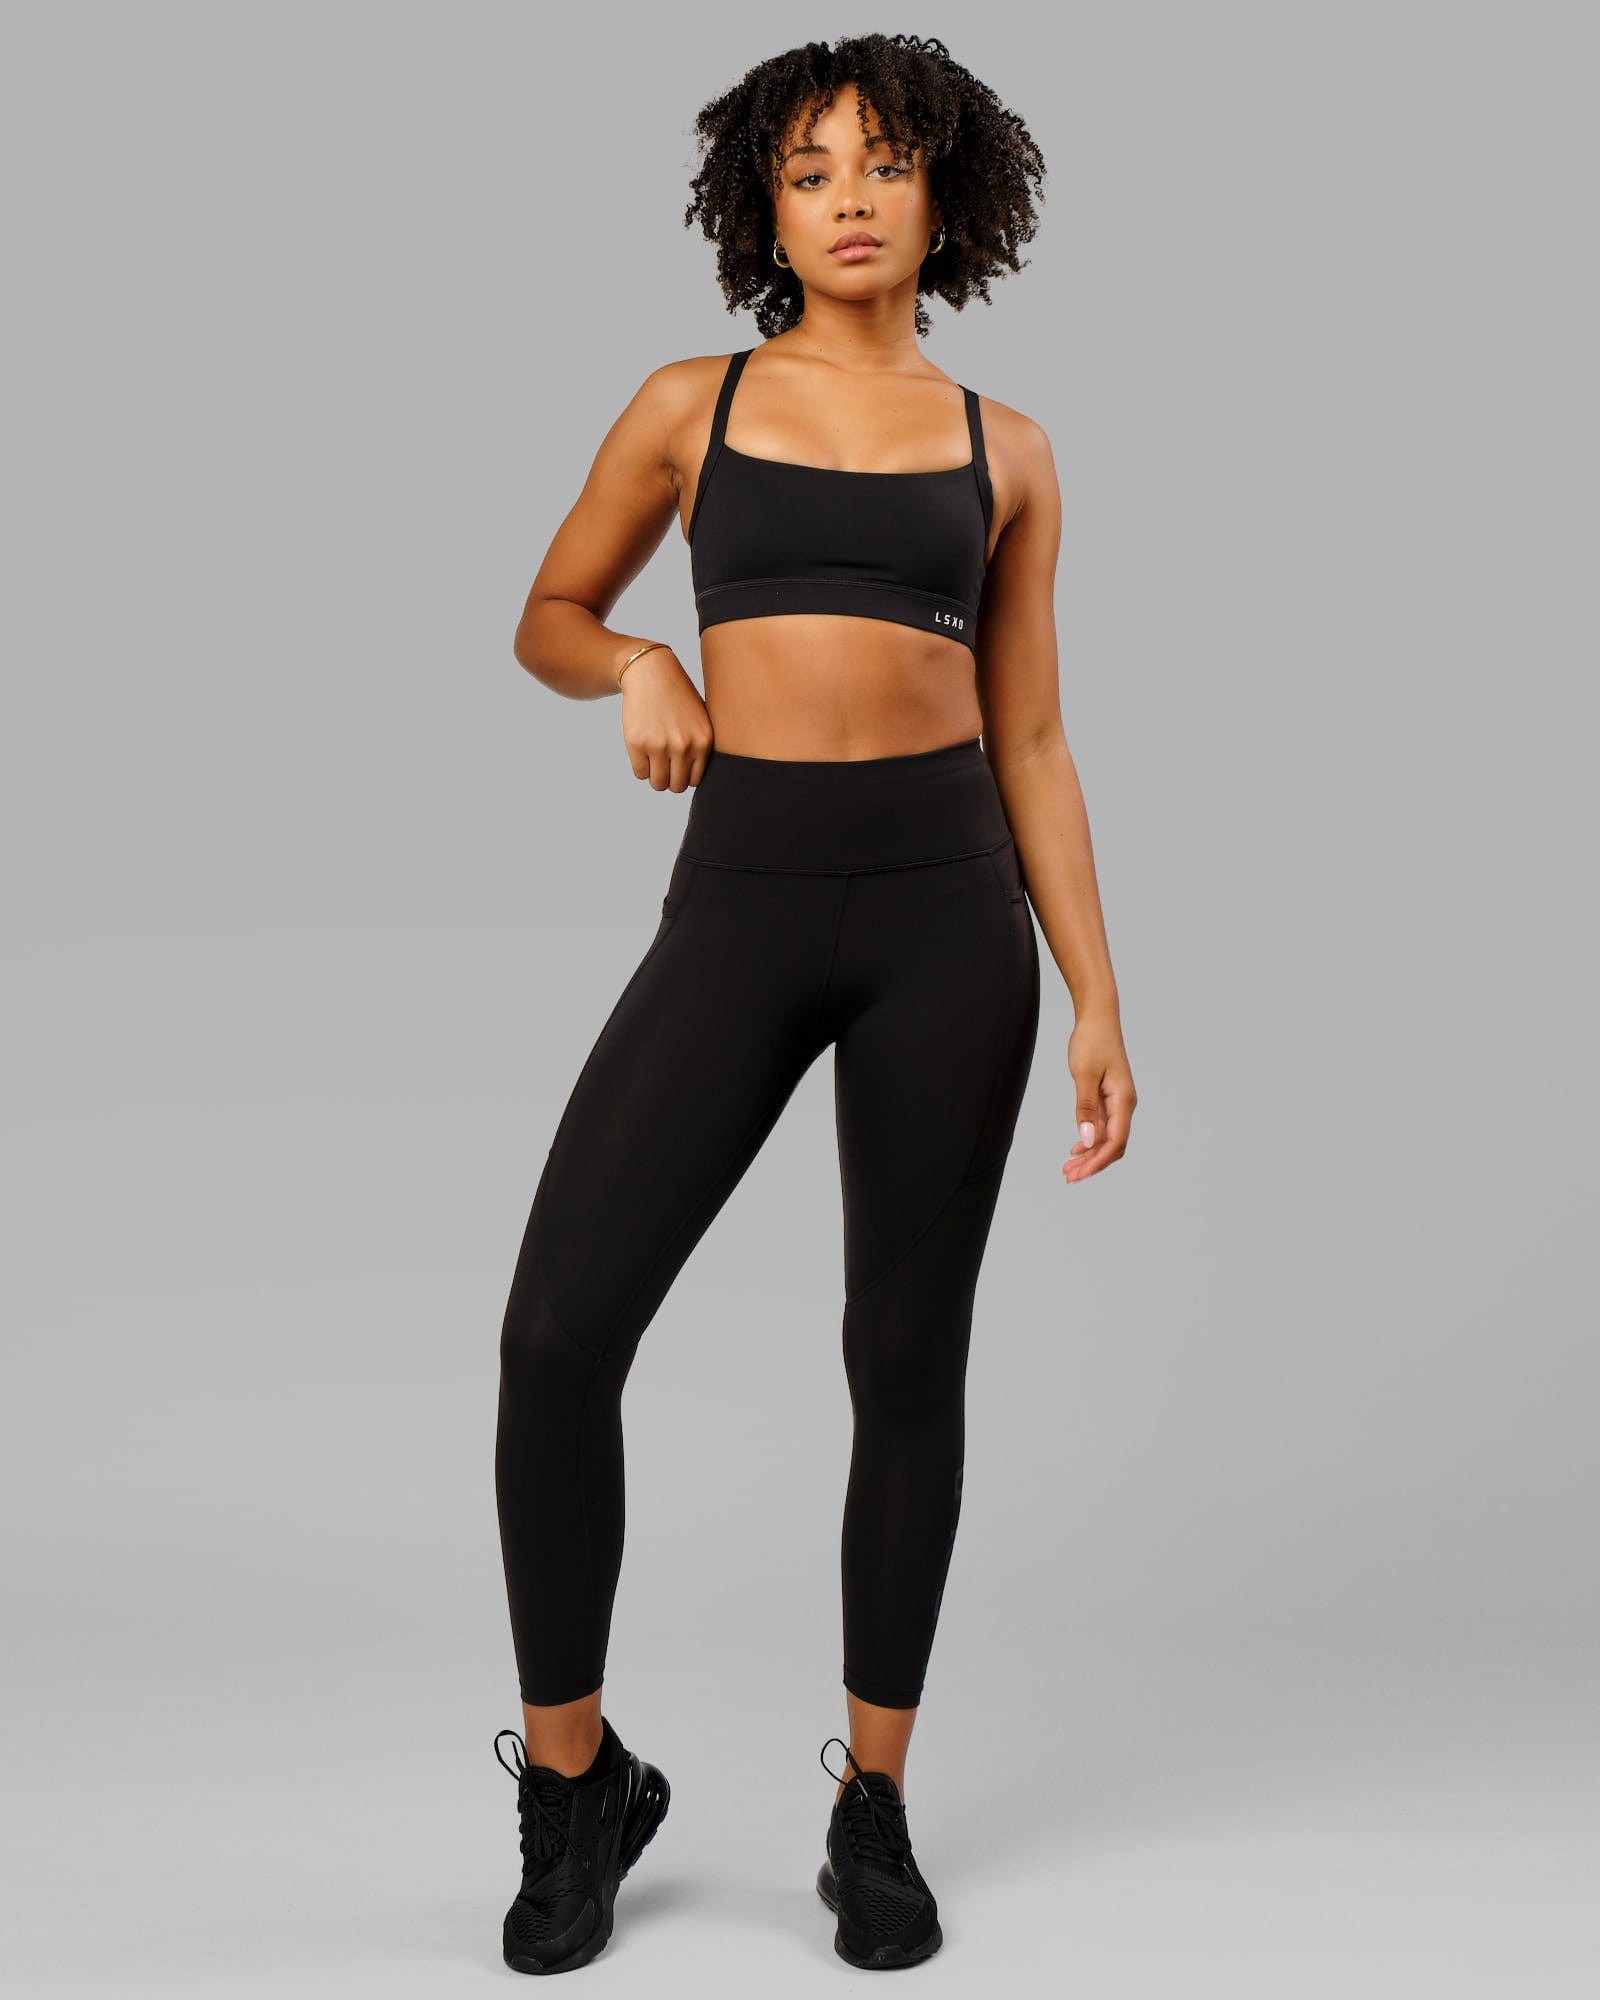 Cord Management 7/8 Length Unlined Tights & Leggings. Nike.com